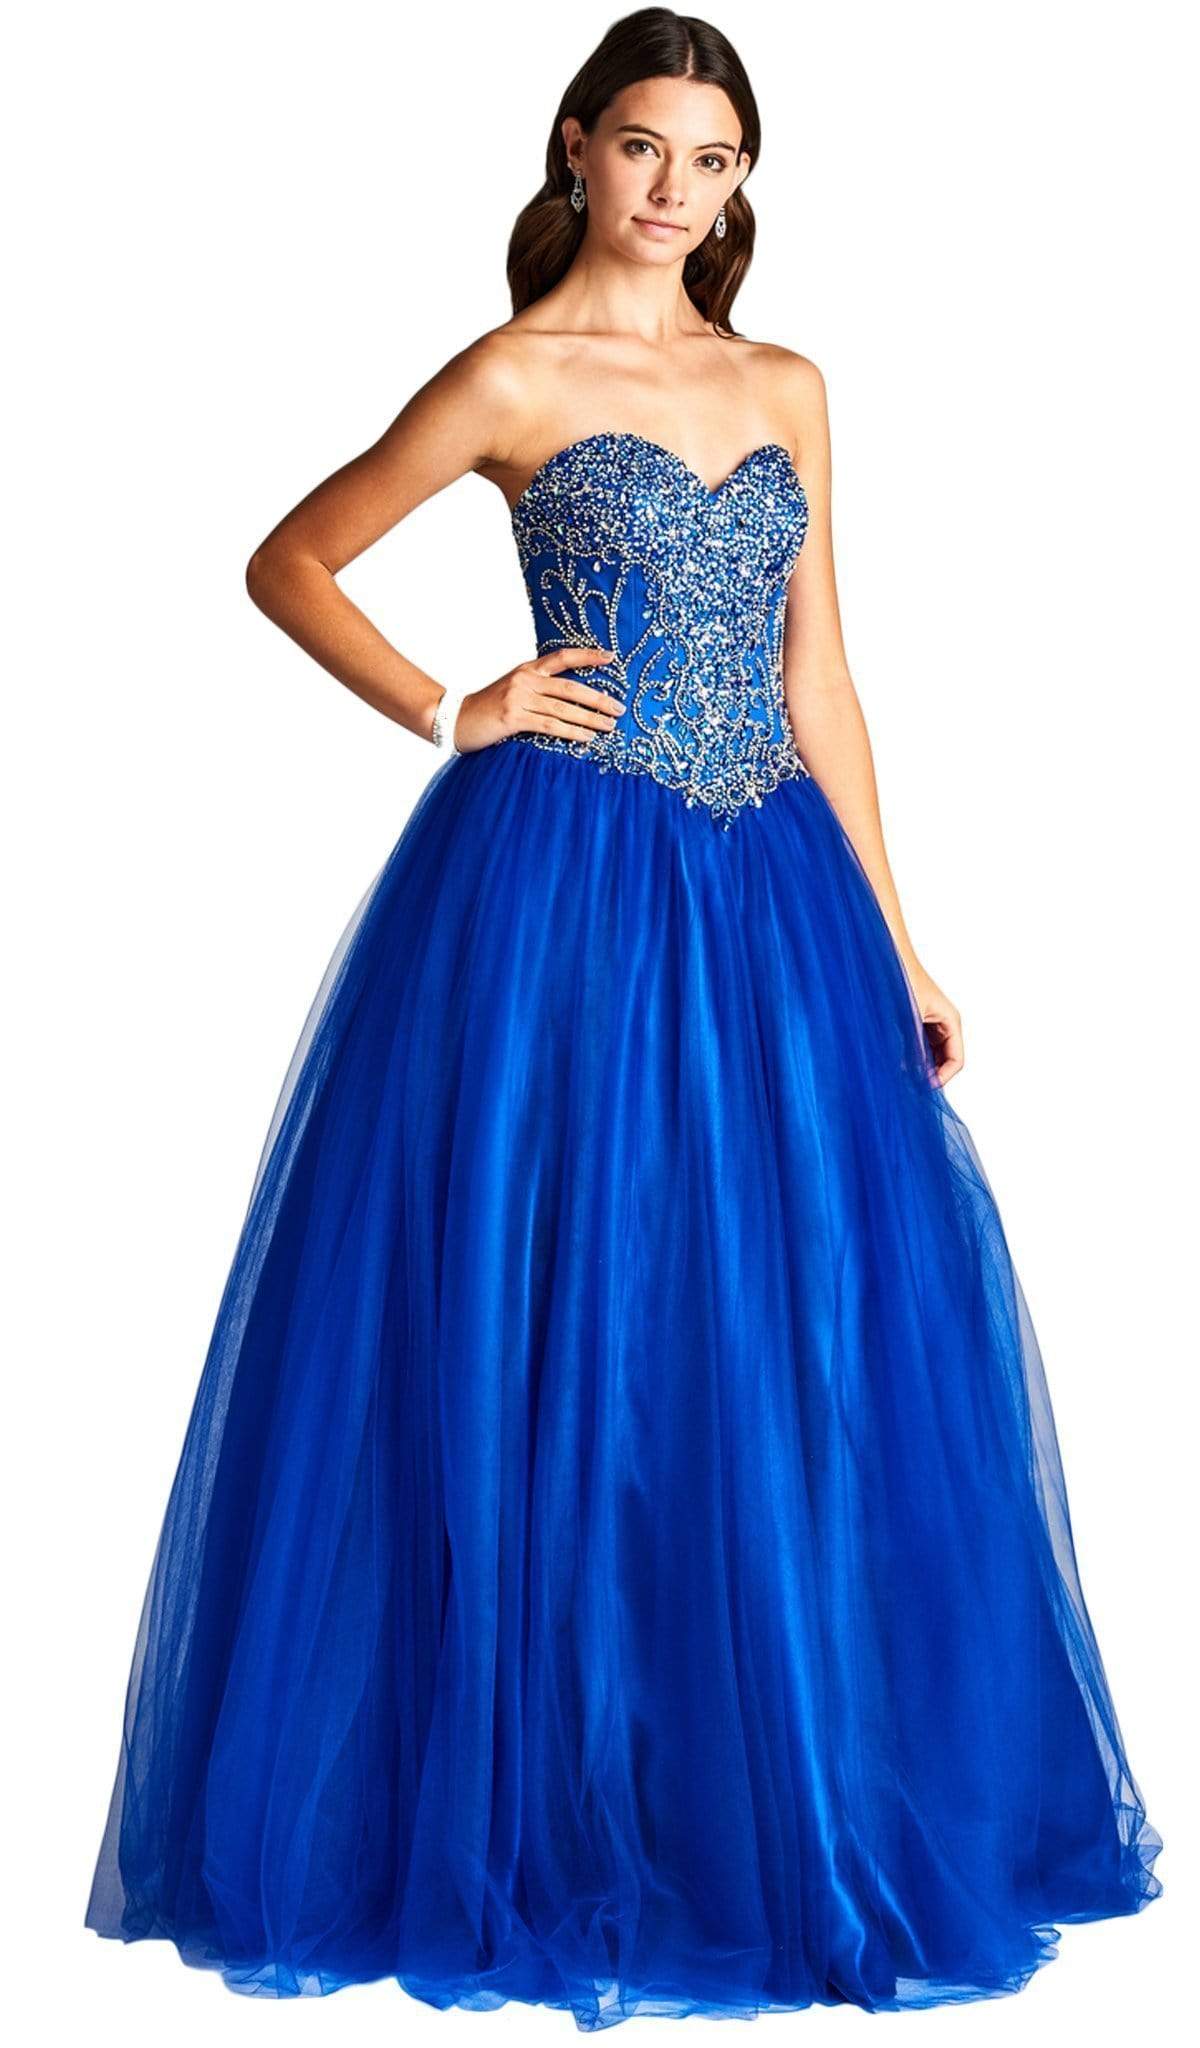 Aspeed Design - Bejeweled Strapless Sweetheart Evening Ballgown
